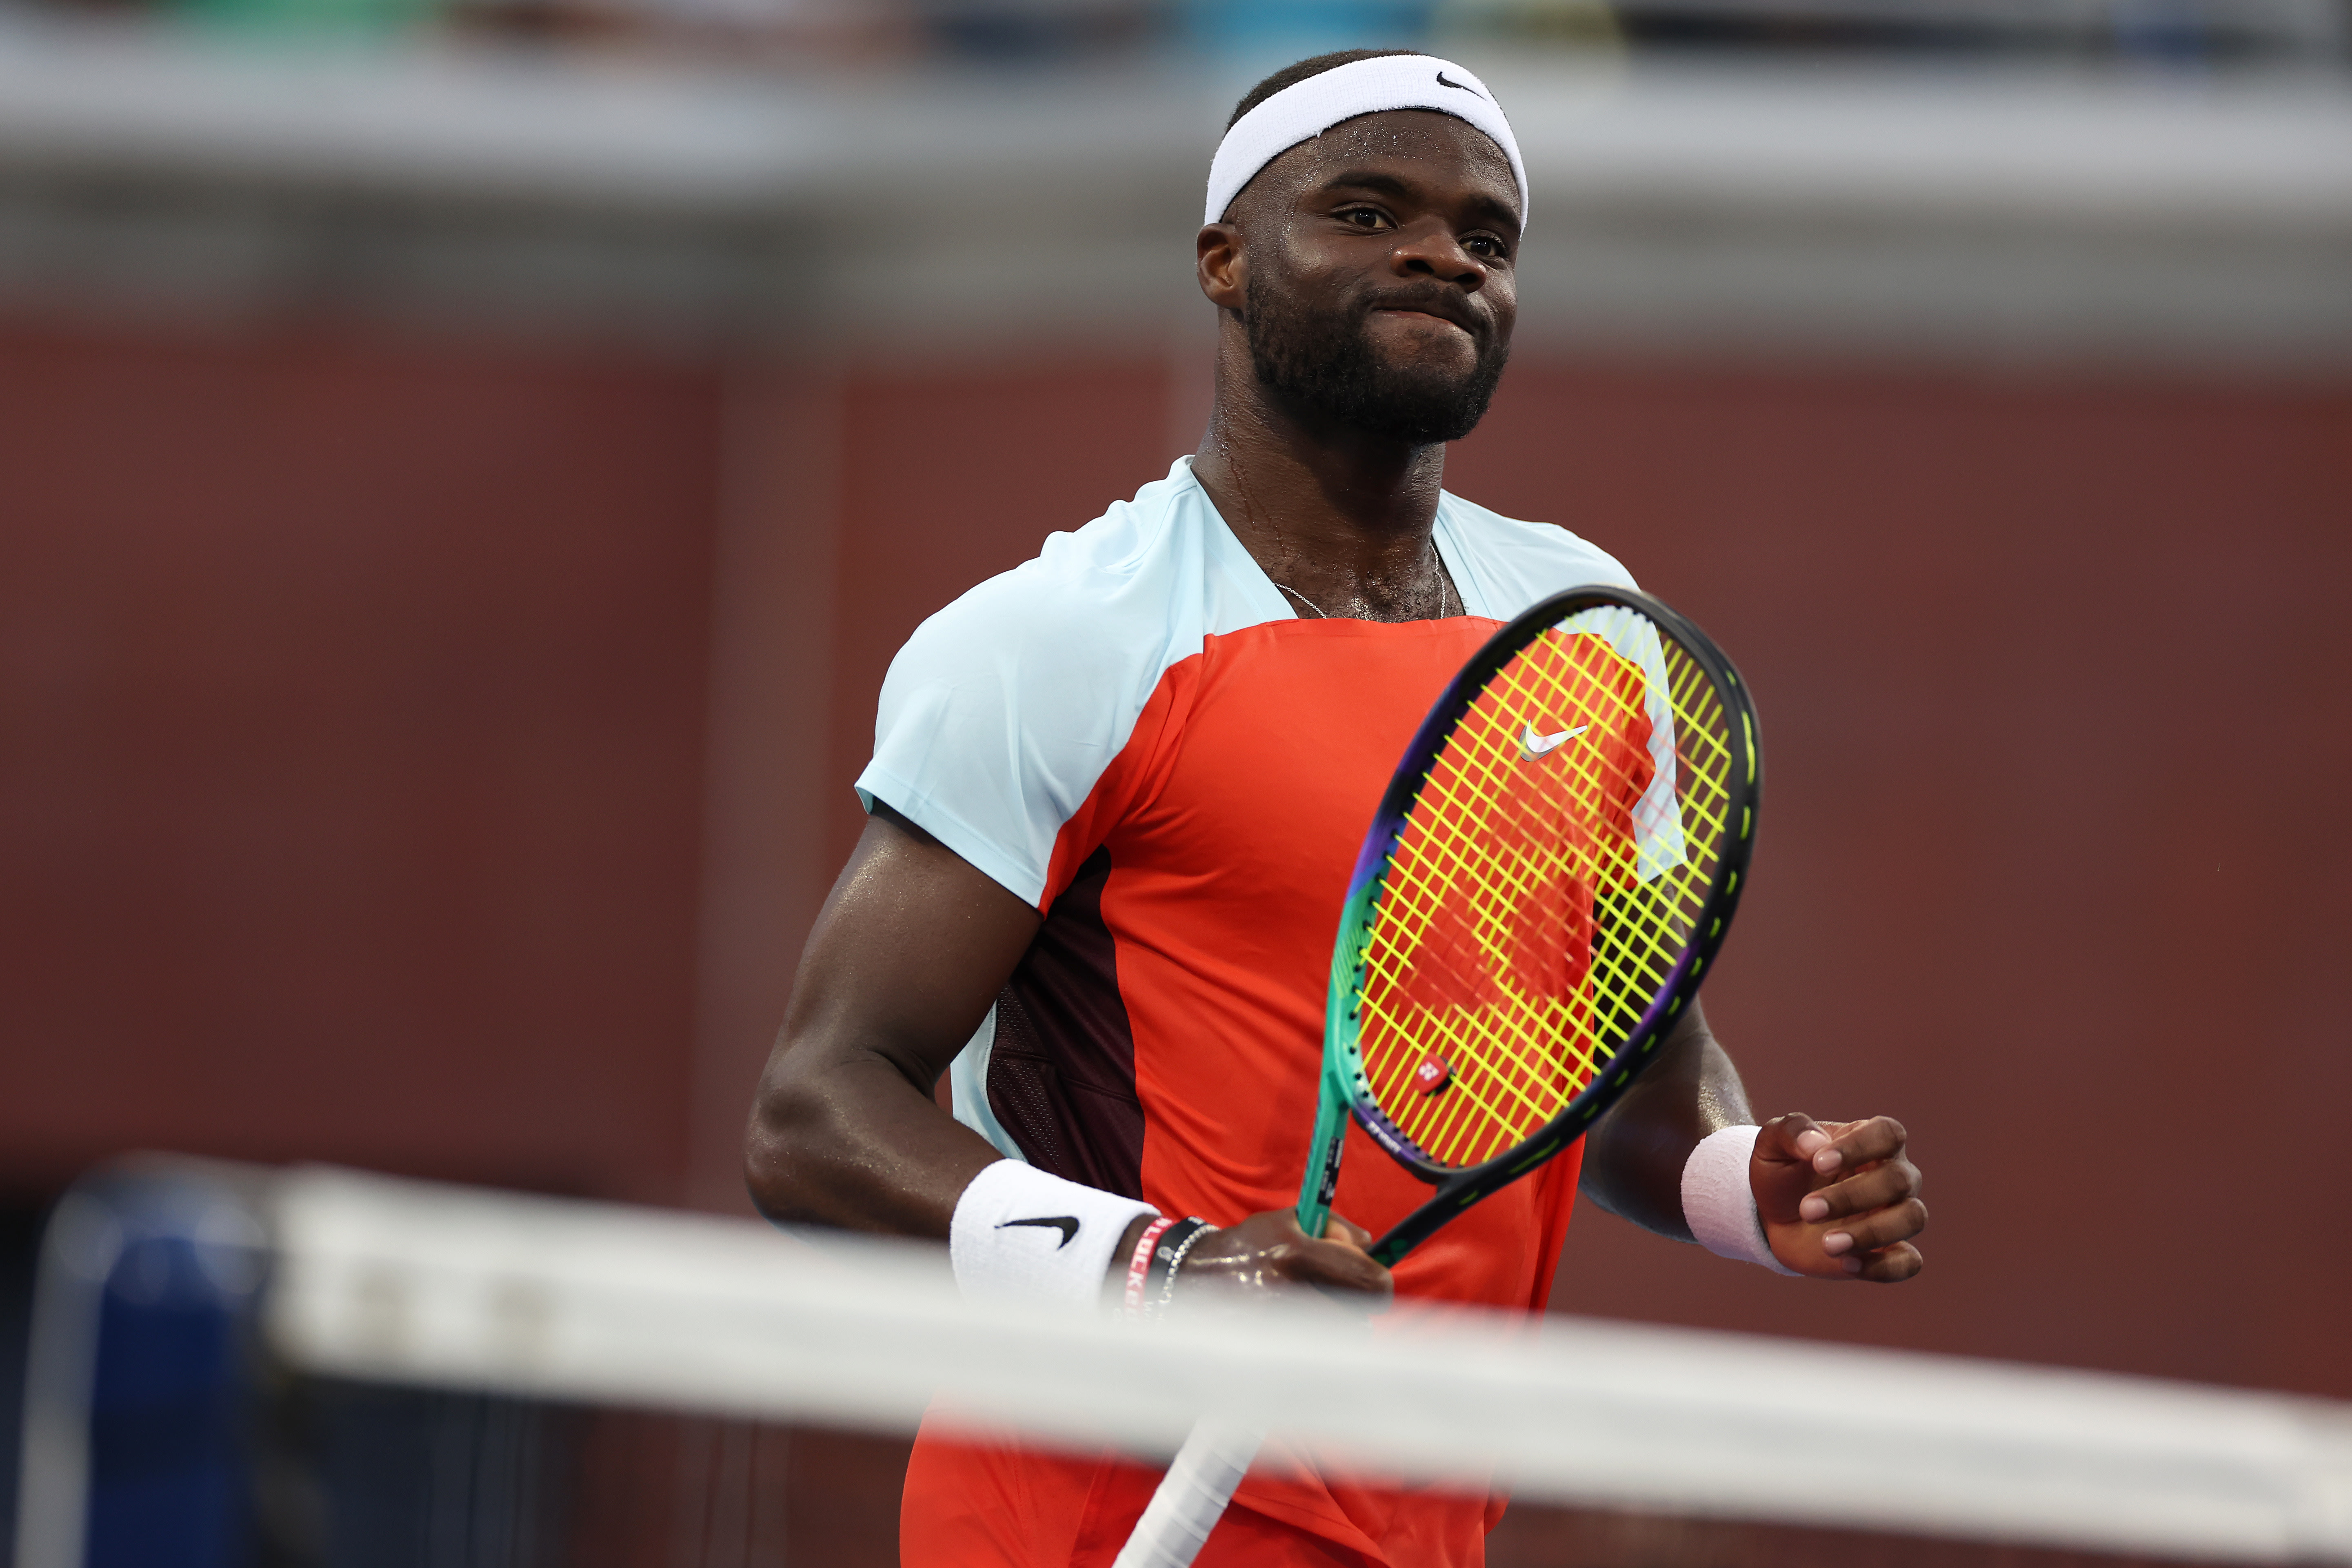 Always gon be my favorite backcourt - Frances Tiafoe reacts to